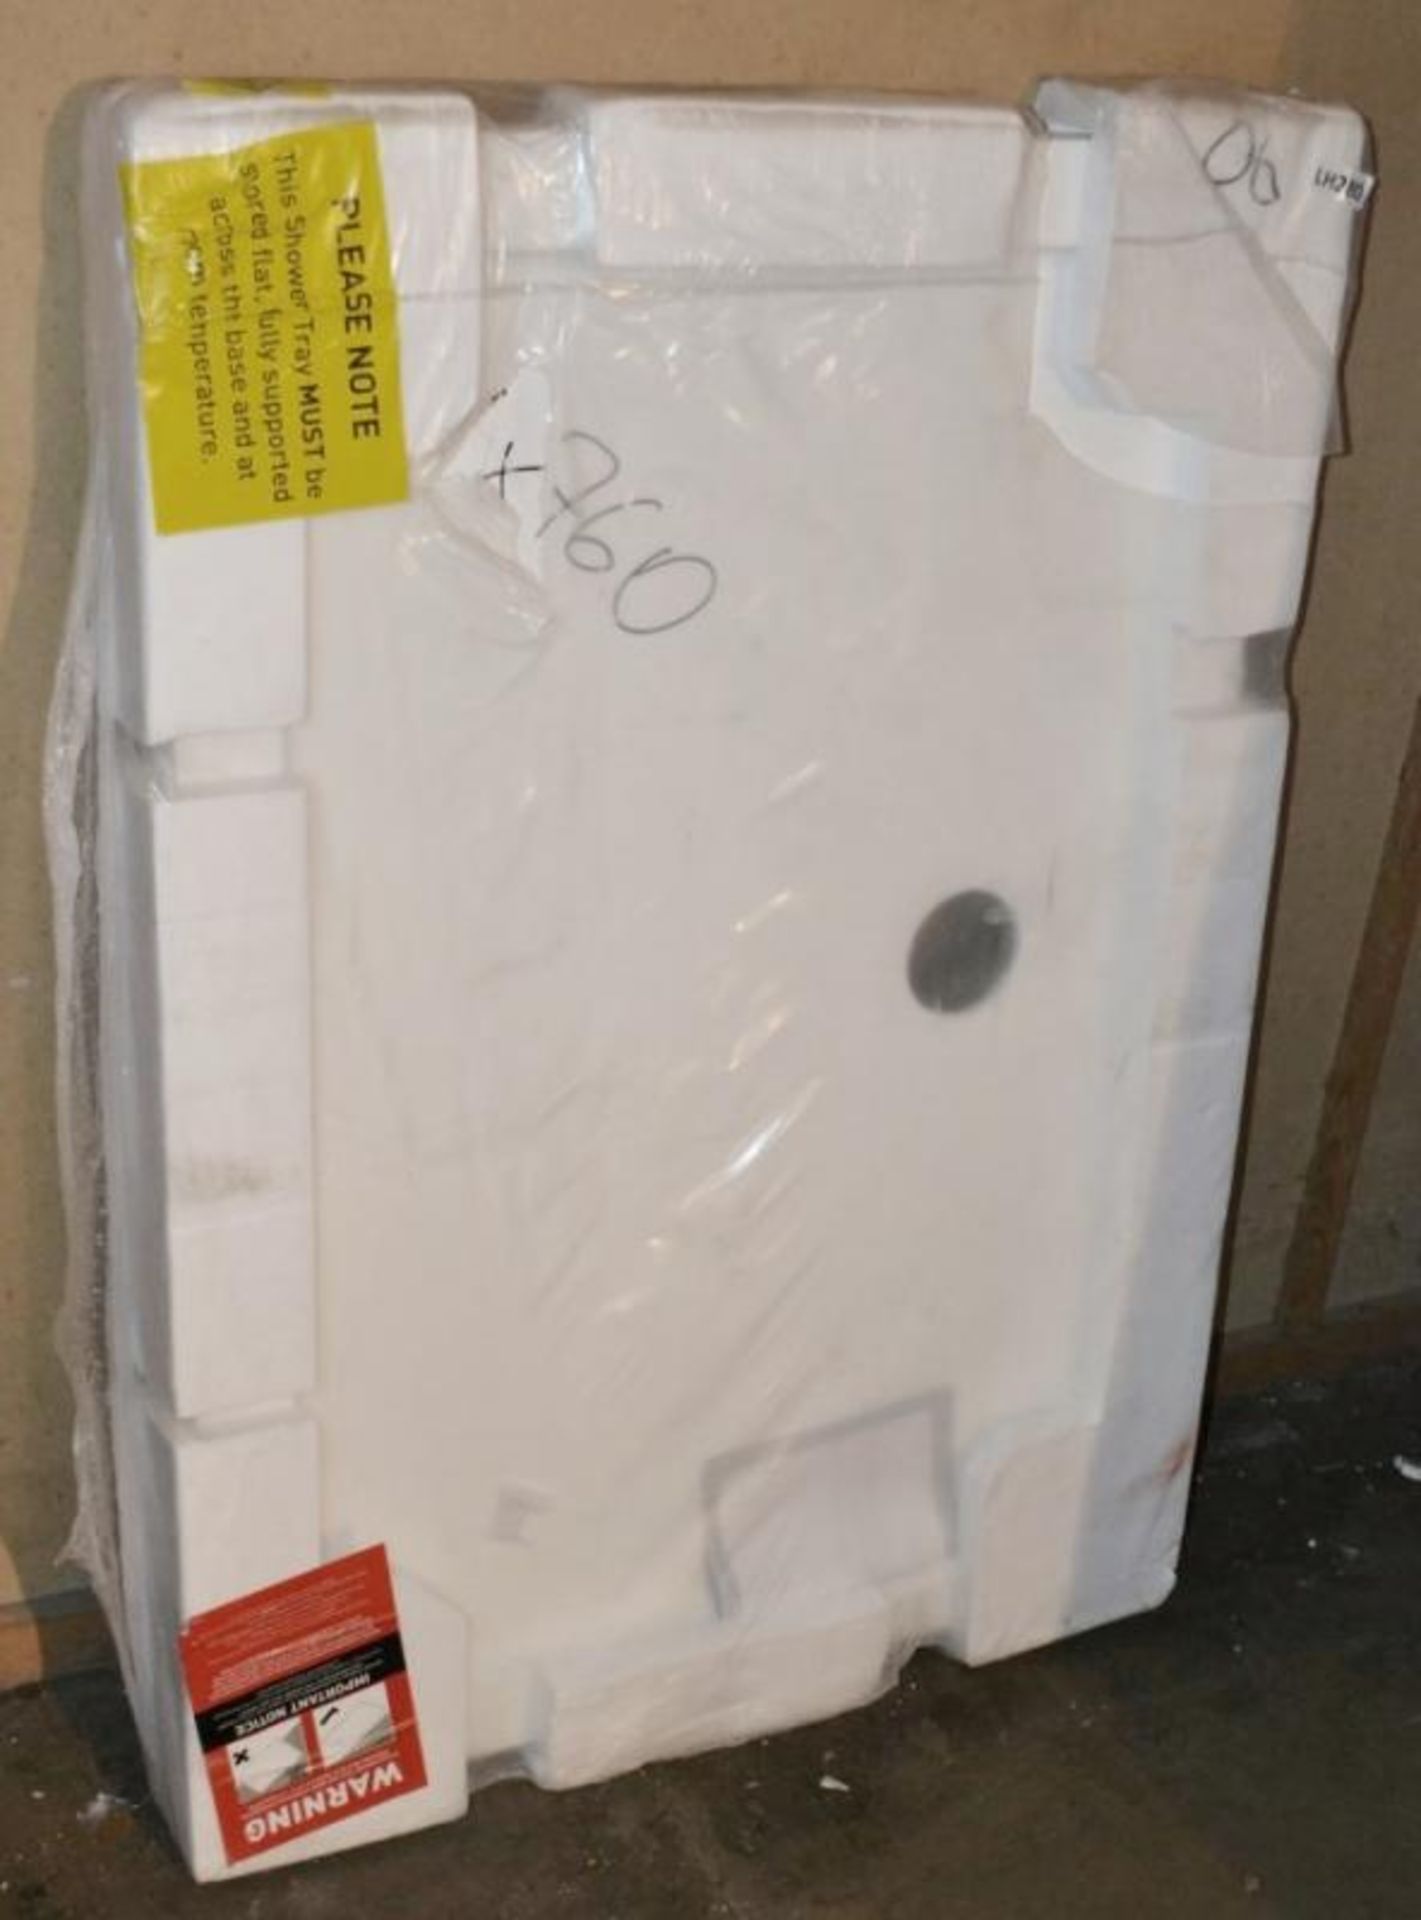 1 x Orchard Rectangular Slimline Stone Shower Tray (TR35) - New / Unused Stock - Dimensions: 1100 x - Image 4 of 4